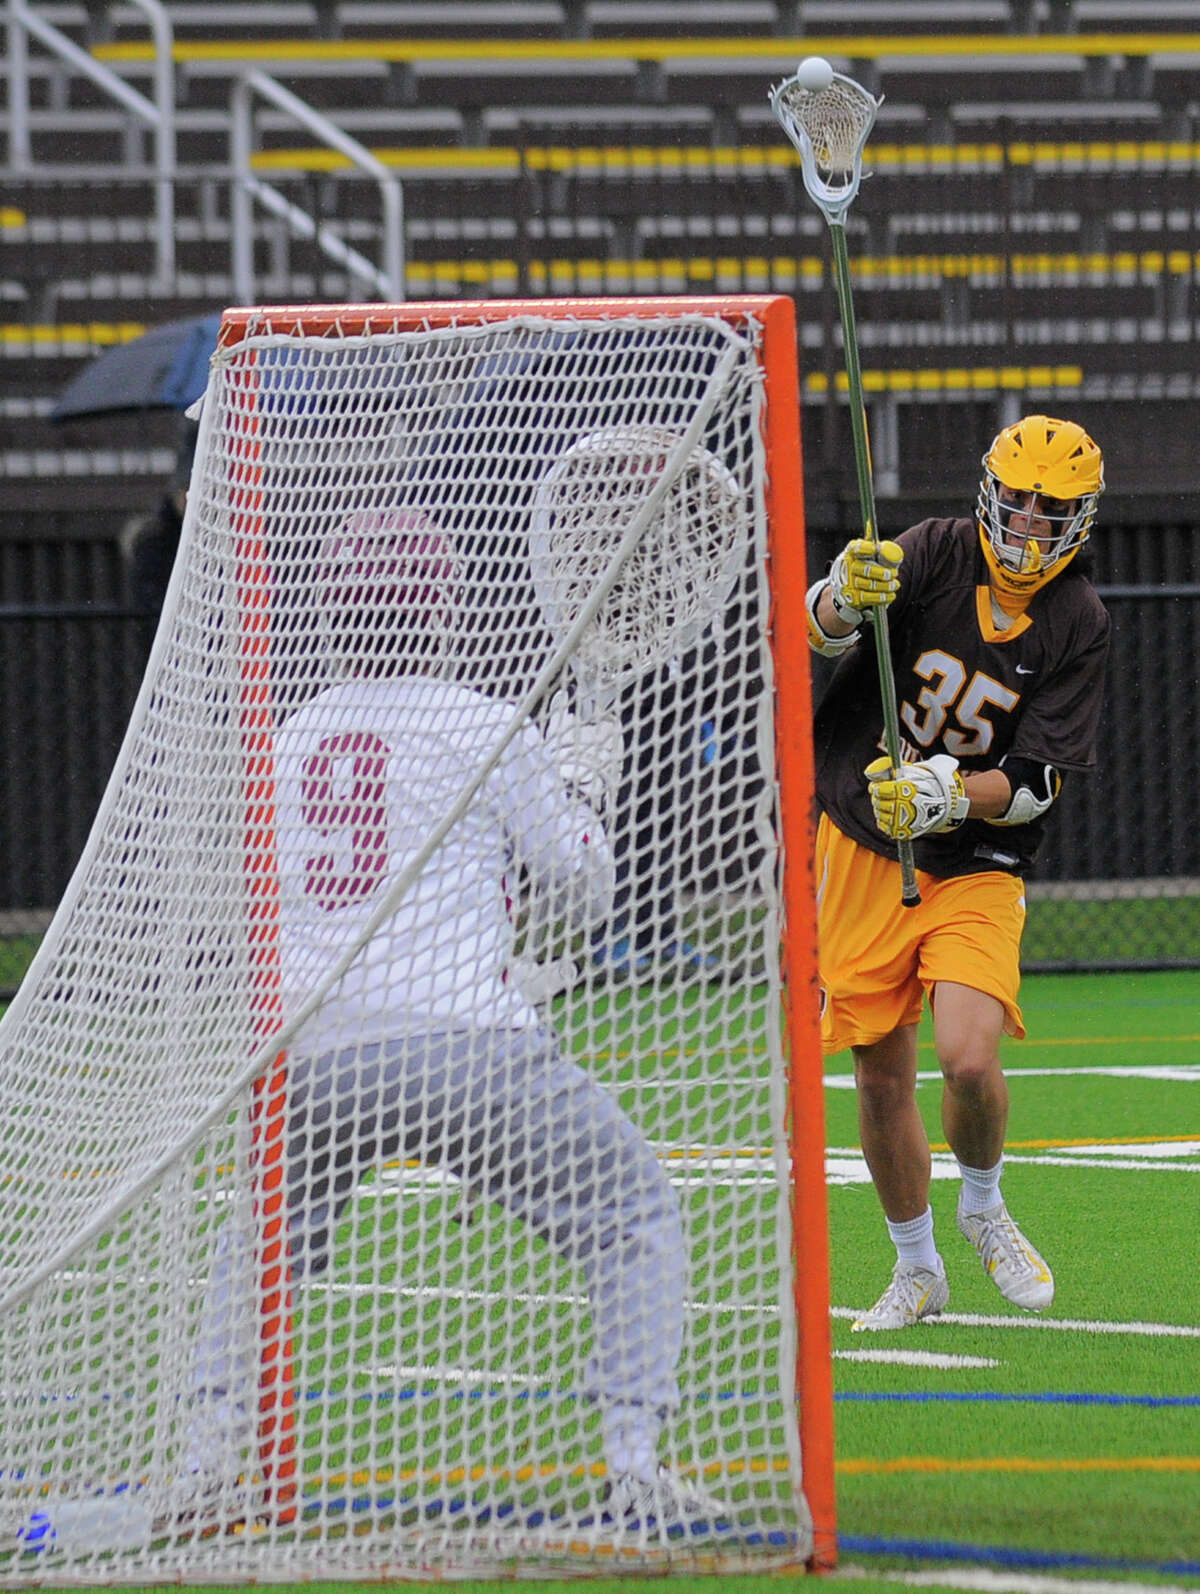 Brunswick’s Max Metalios fires a shot in for a first-half goal past Loomis Chaffee goalie Frederick Dreyer on Saturday in Greenwich. Brunswick defeated Loomis Chaffee 19-4.